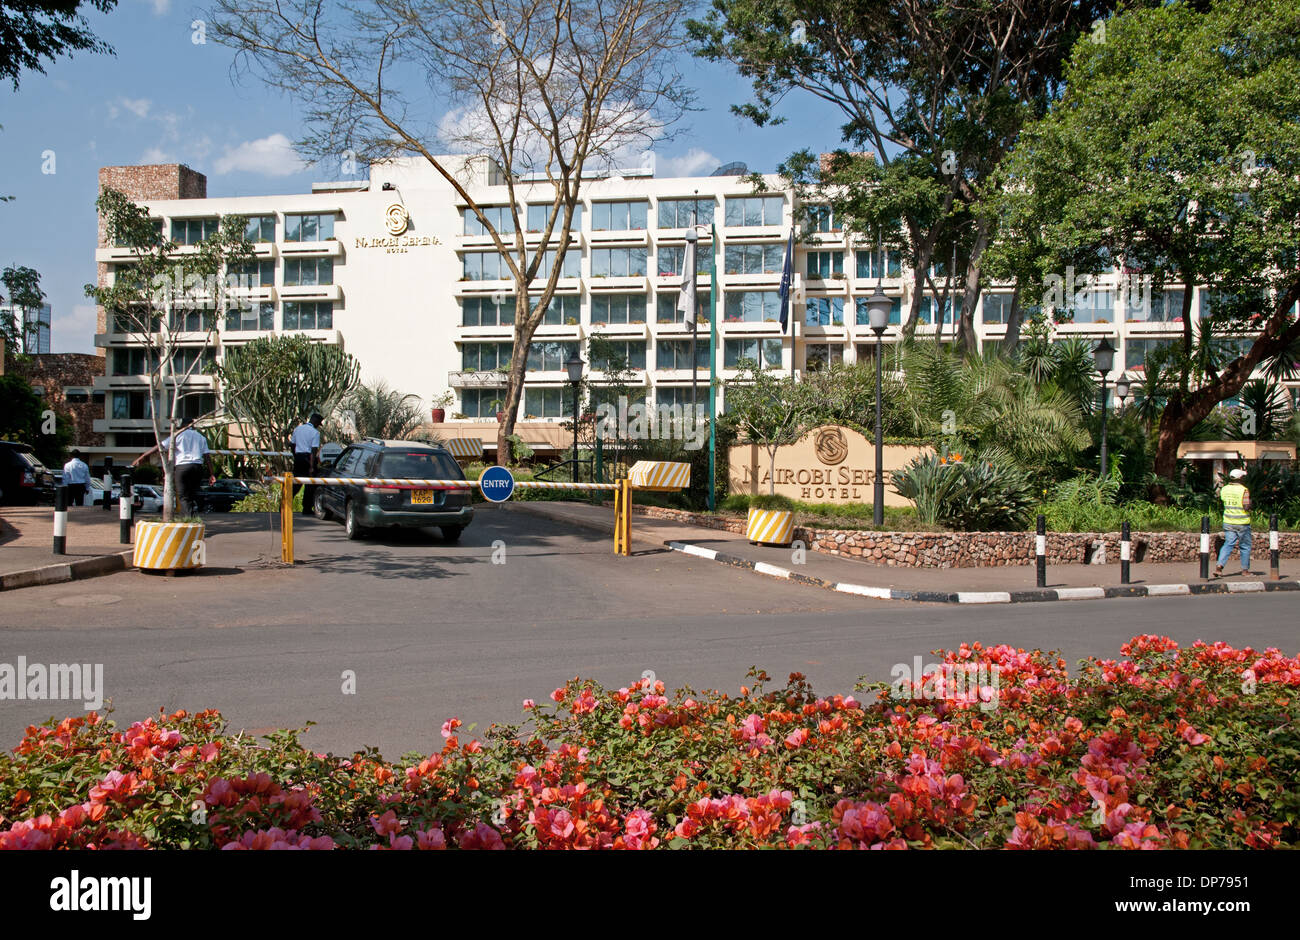 Entrance to Nairobi Serena Hotel car park with double barriers for security and bougainvillea flowers Stock Photo